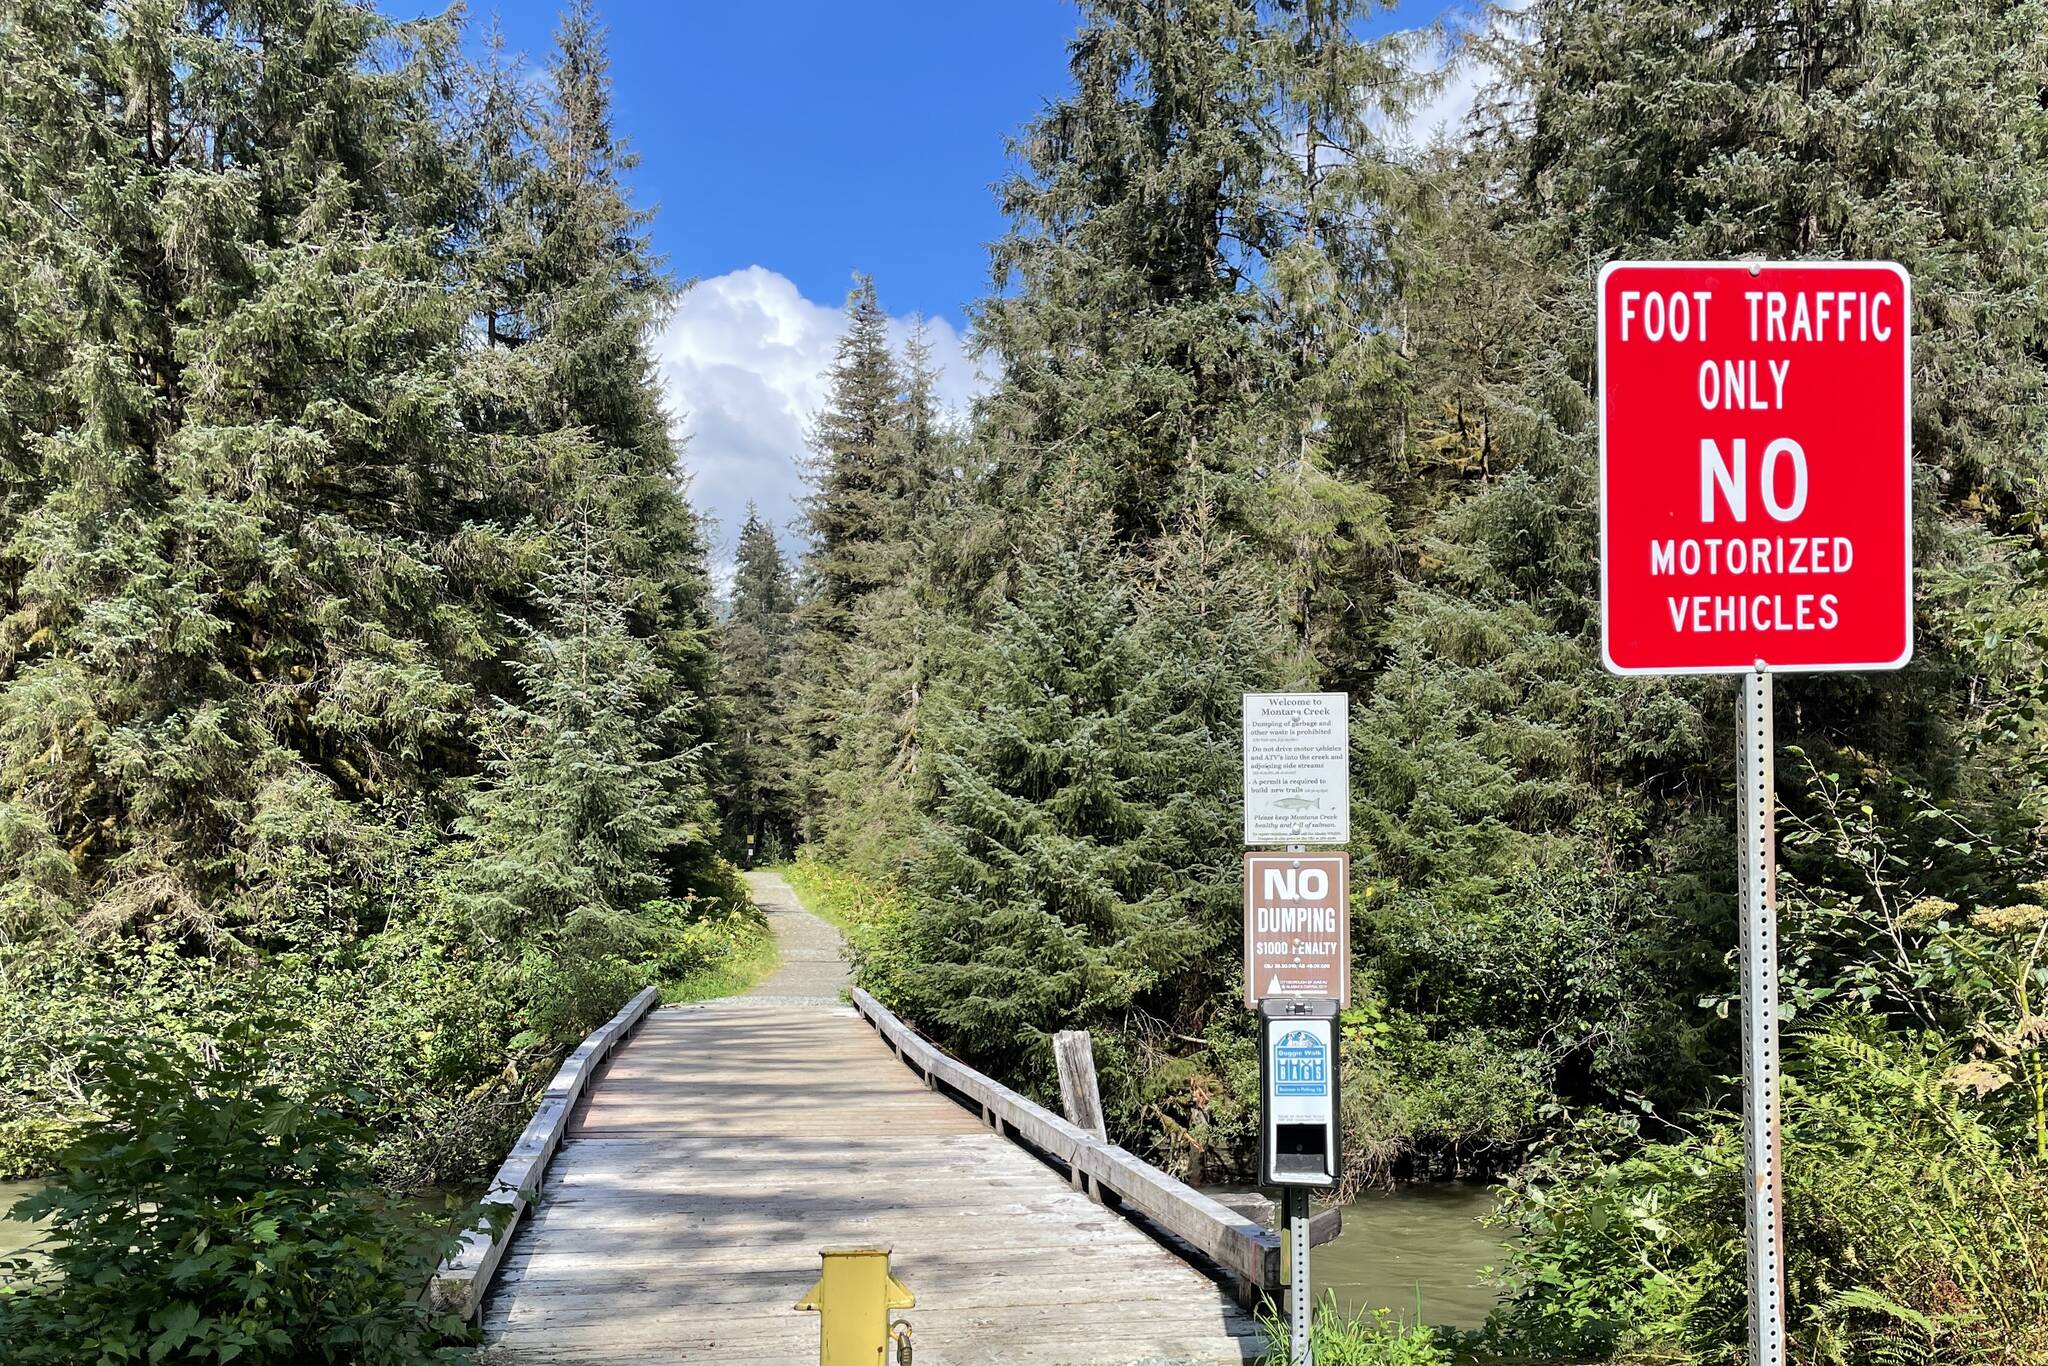 The Montana Creek Bridge is closed to all vehicle traffic following recent weather that has damaged the structure, according to the Department of Transportation and Public Facilities. (Michael S. Lockett / Juneau Empire)